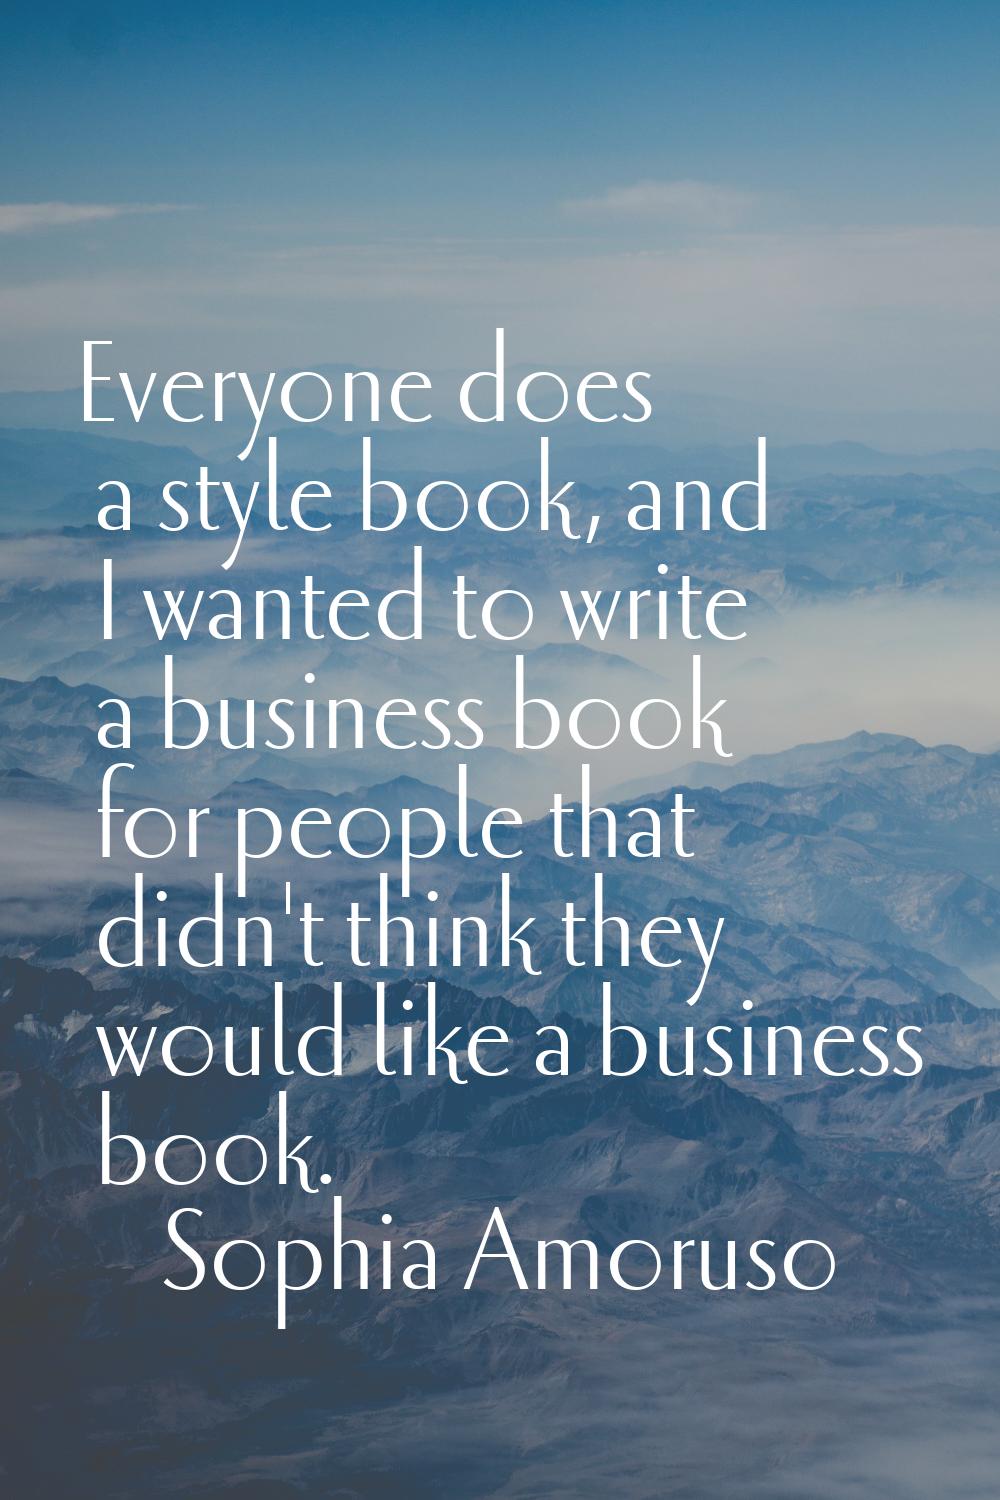 Everyone does a style book, and I wanted to write a business book for people that didn't think they